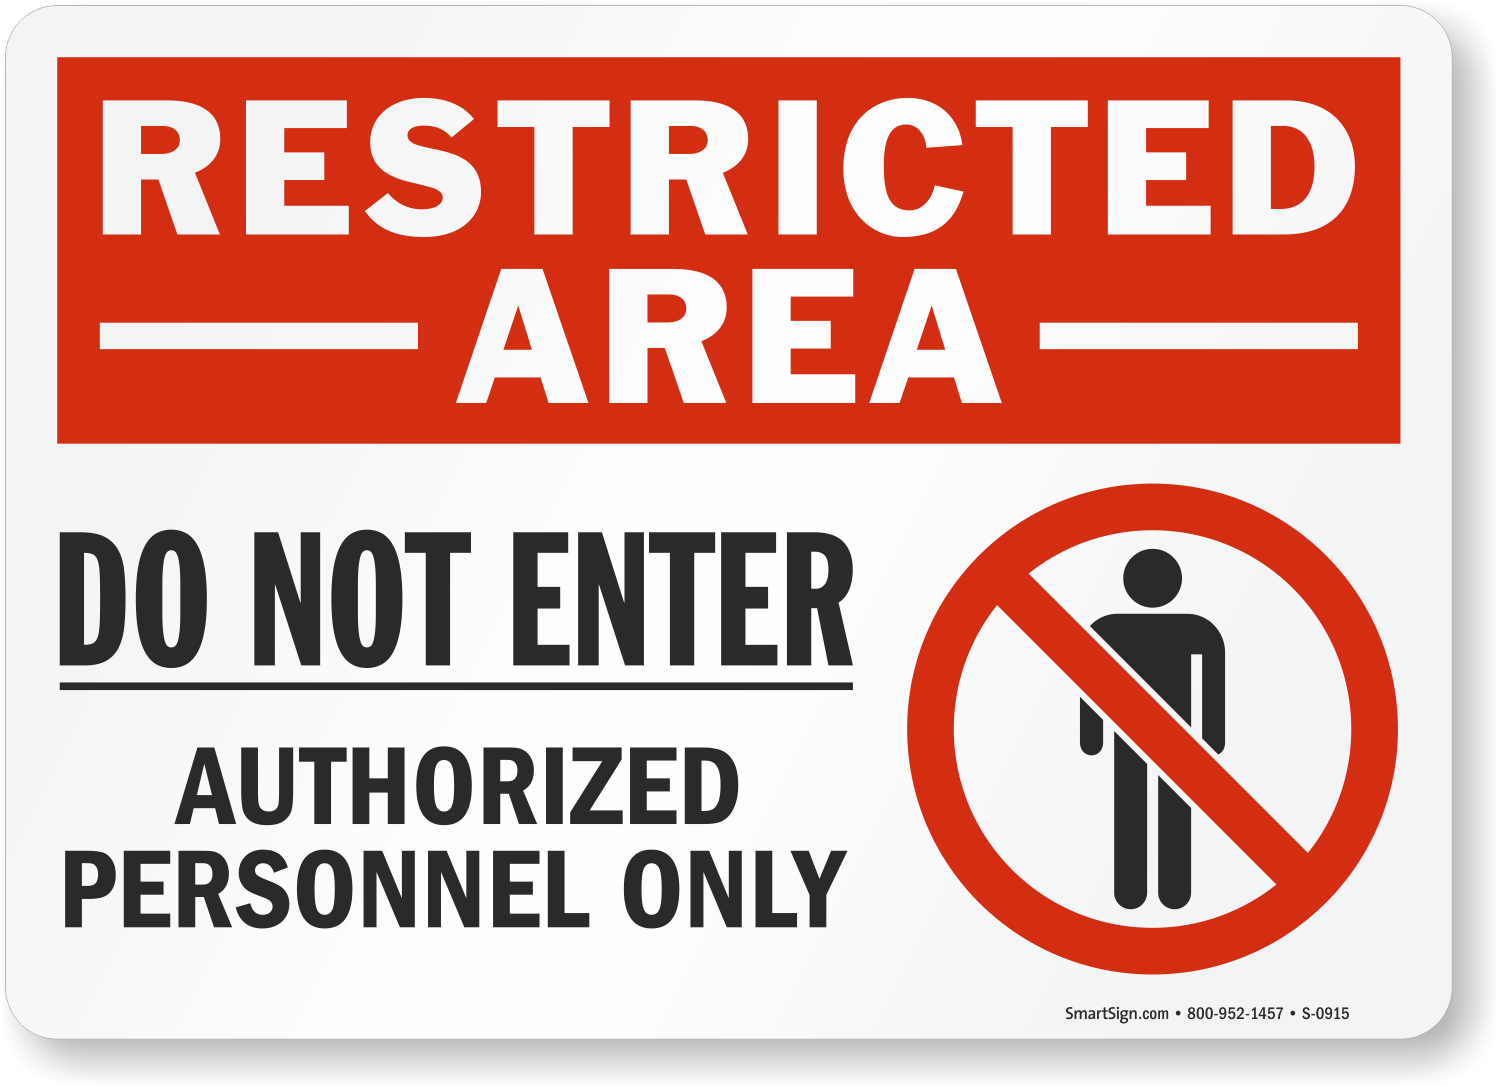 Restricted area sign. Authorized personnel only. Предупреждение restricted. Do not enter authorized personnel only. Dont only